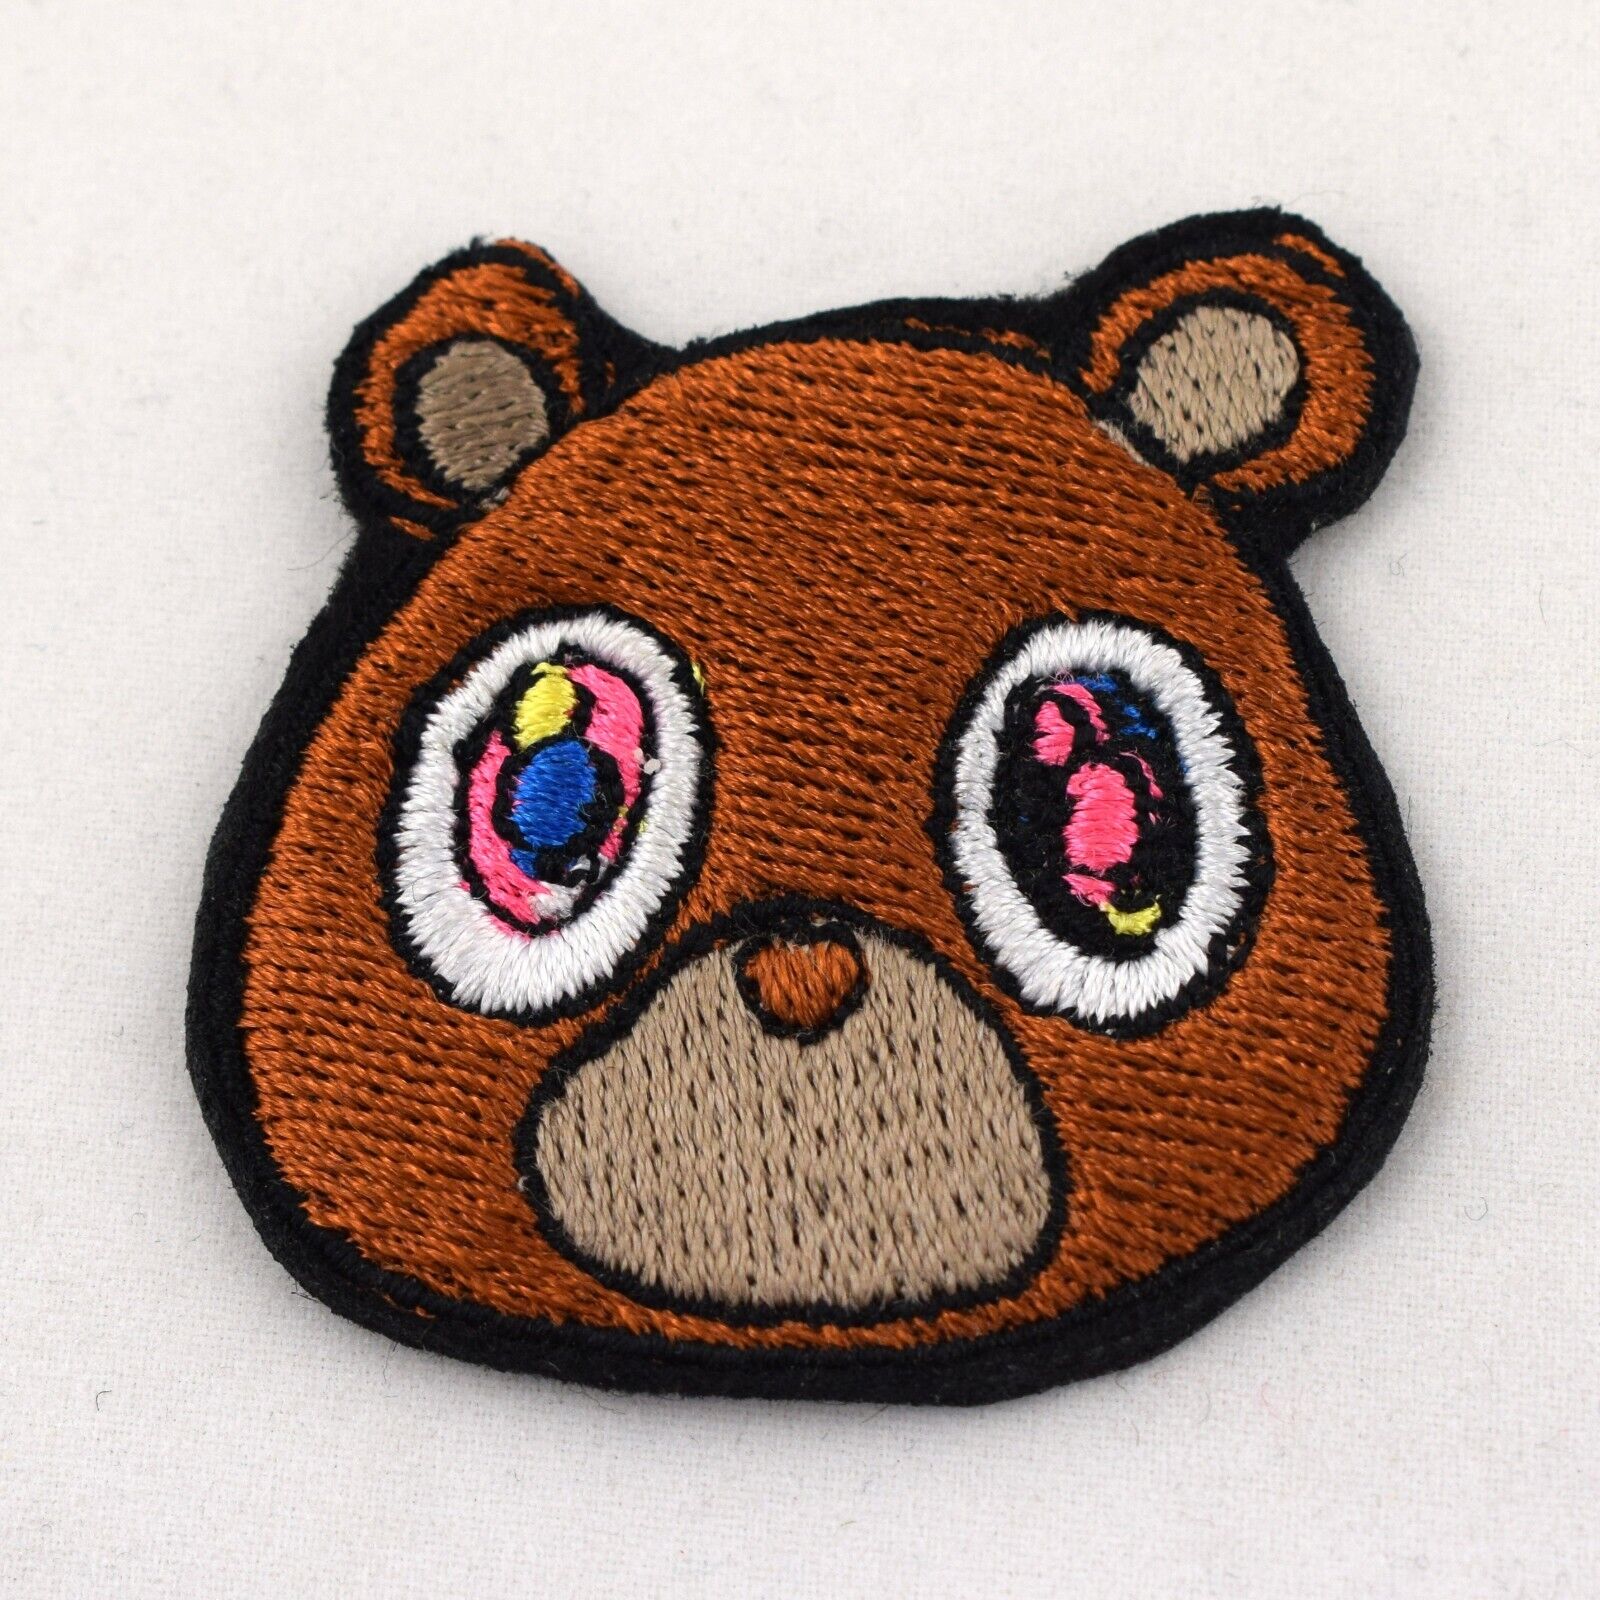 Iron on Patch - Kanye West Dropout Bear New Embroidered Hip Hop Rap